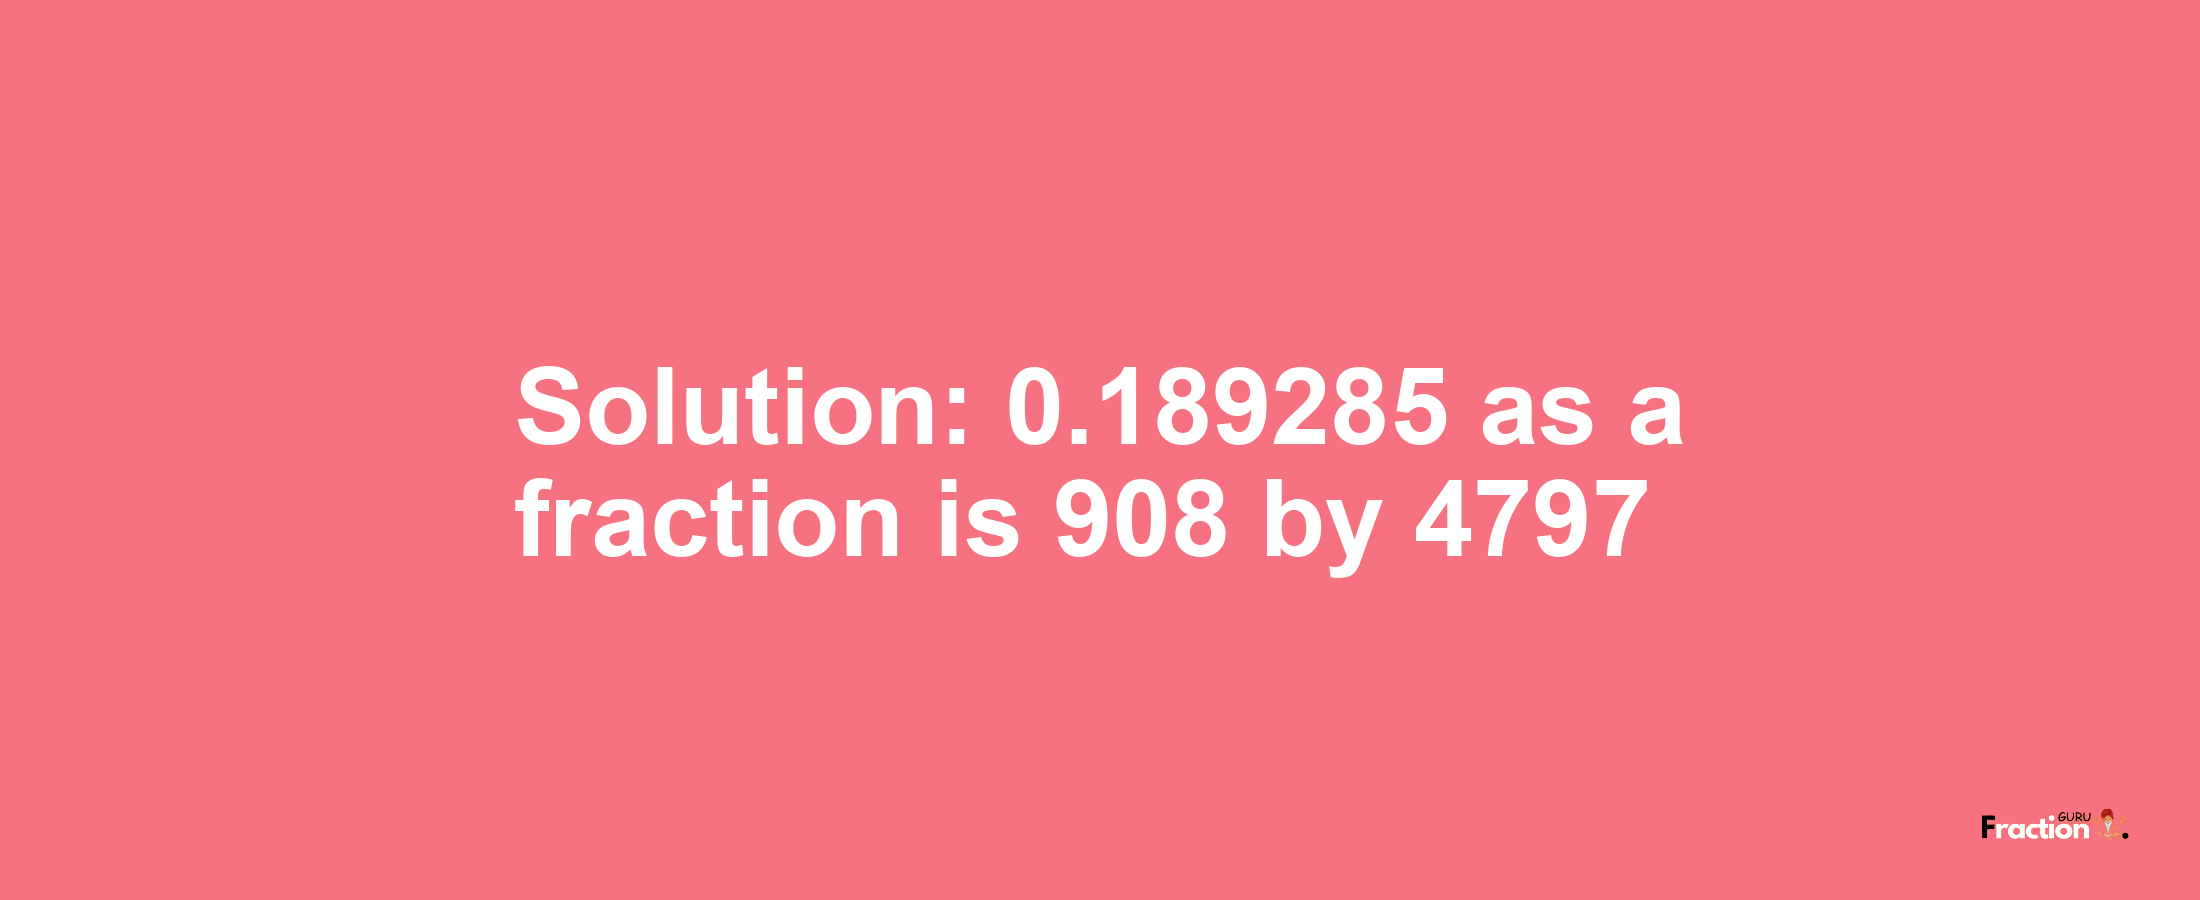 Solution:0.189285 as a fraction is 908/4797